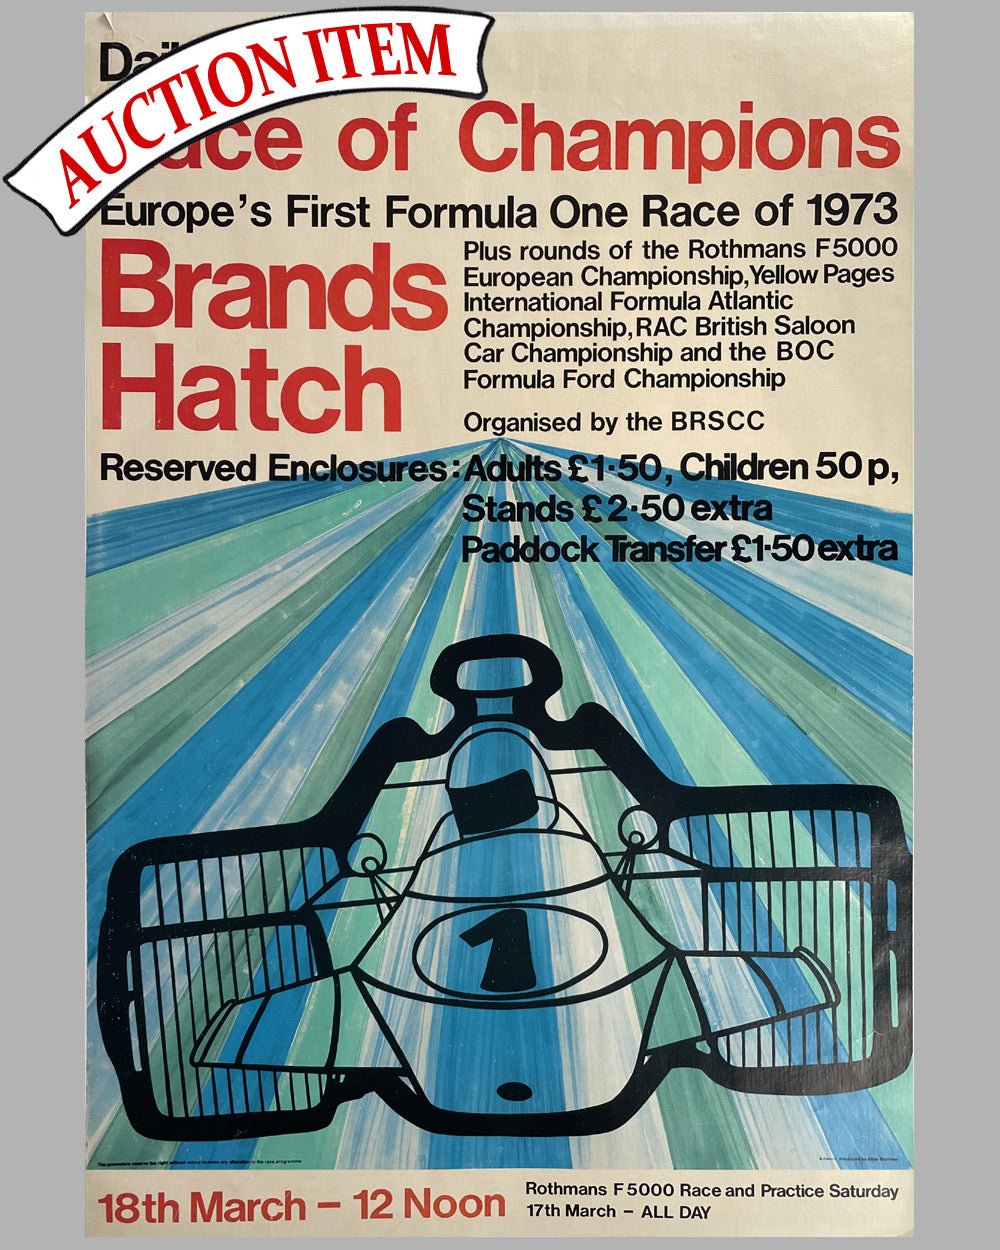 1973 Formula 1 Race of Champions original race poster by Han Burrows